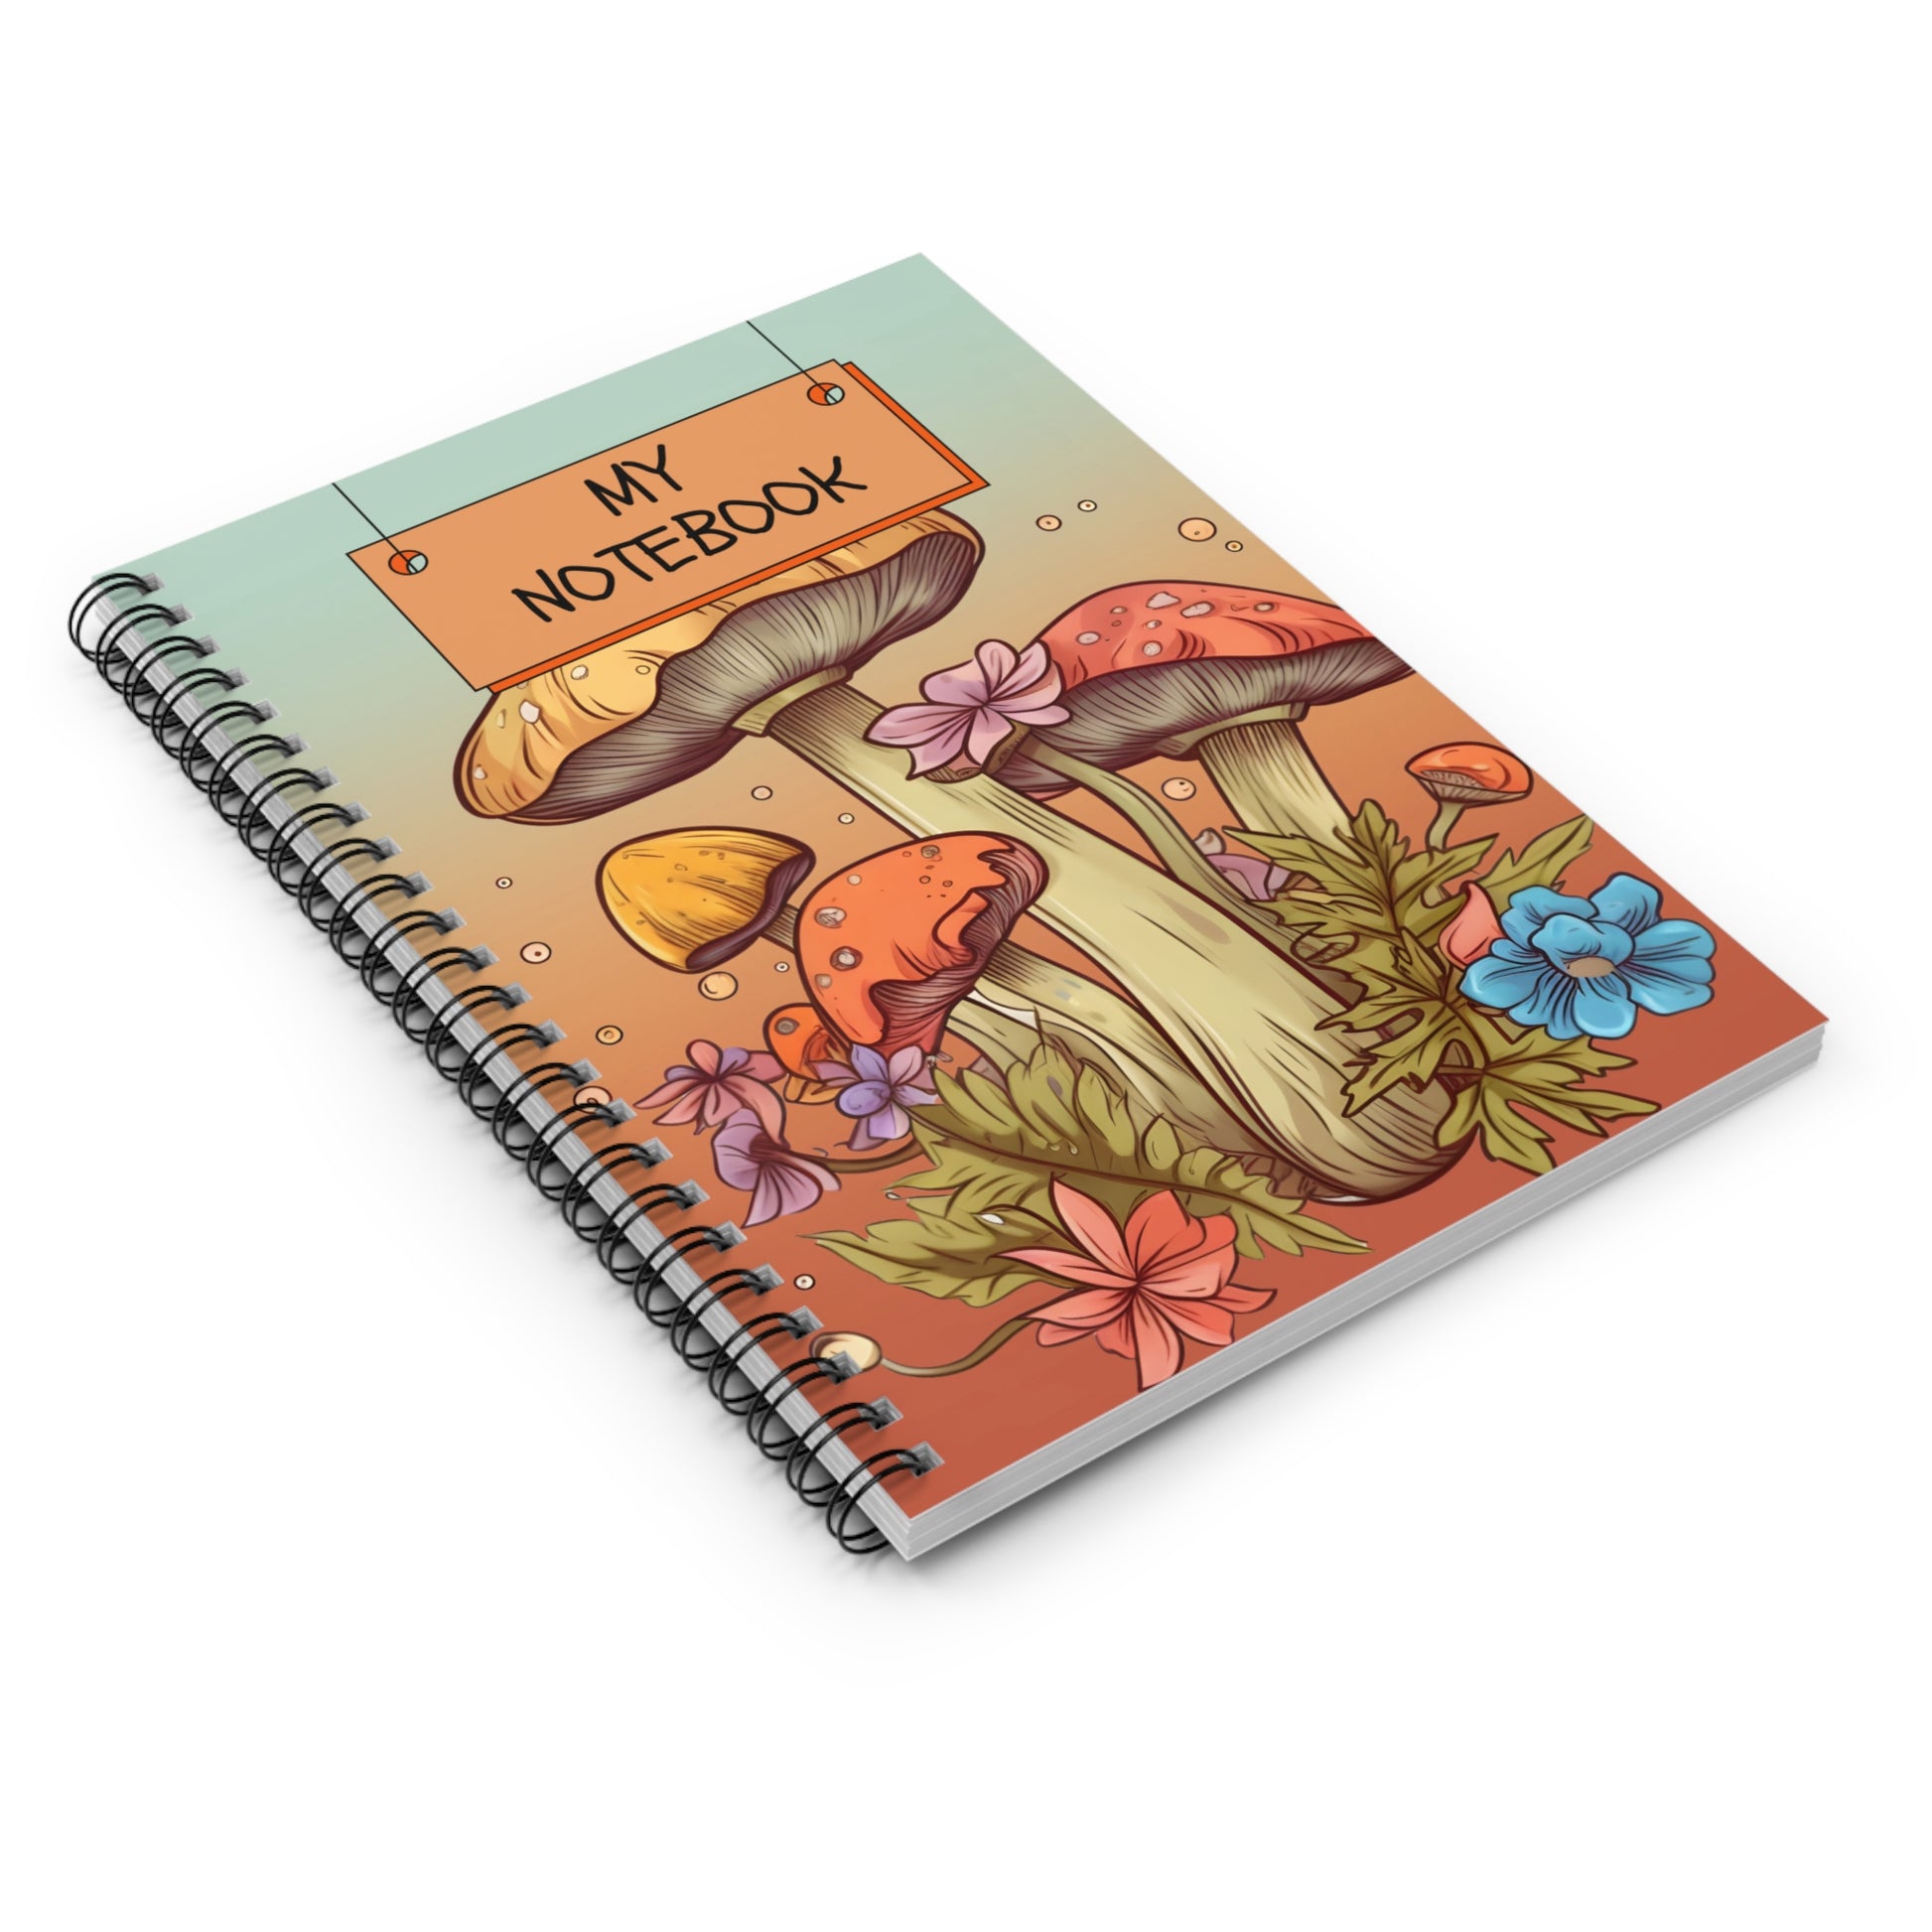 My Notebook Spiral Notebook - Ruled Line Paper products Krazy Heart Designs Boutique   